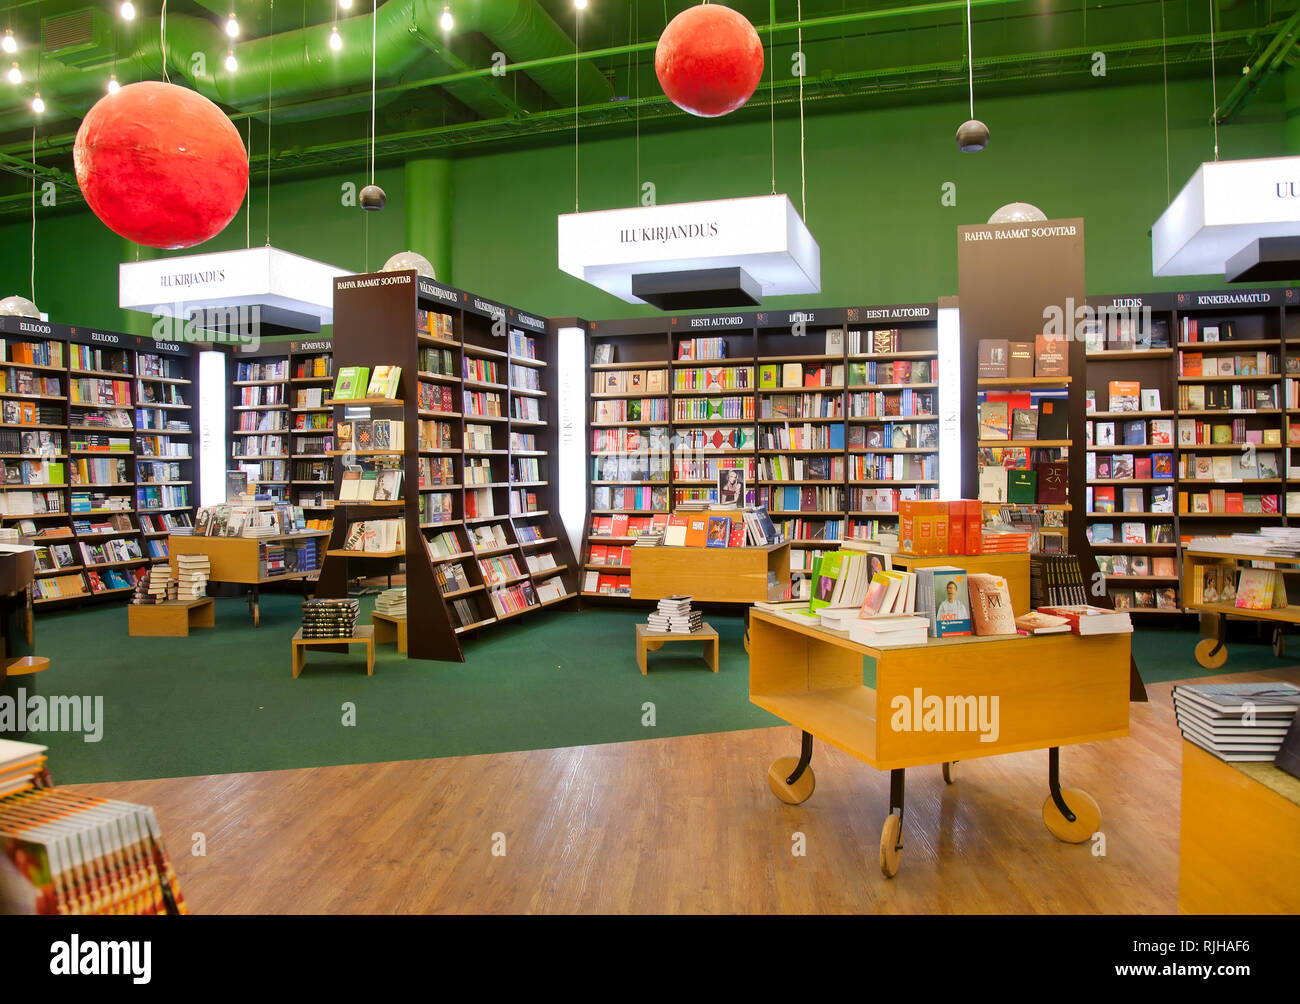 Books on shelves and tables in bookstore Stock Photo